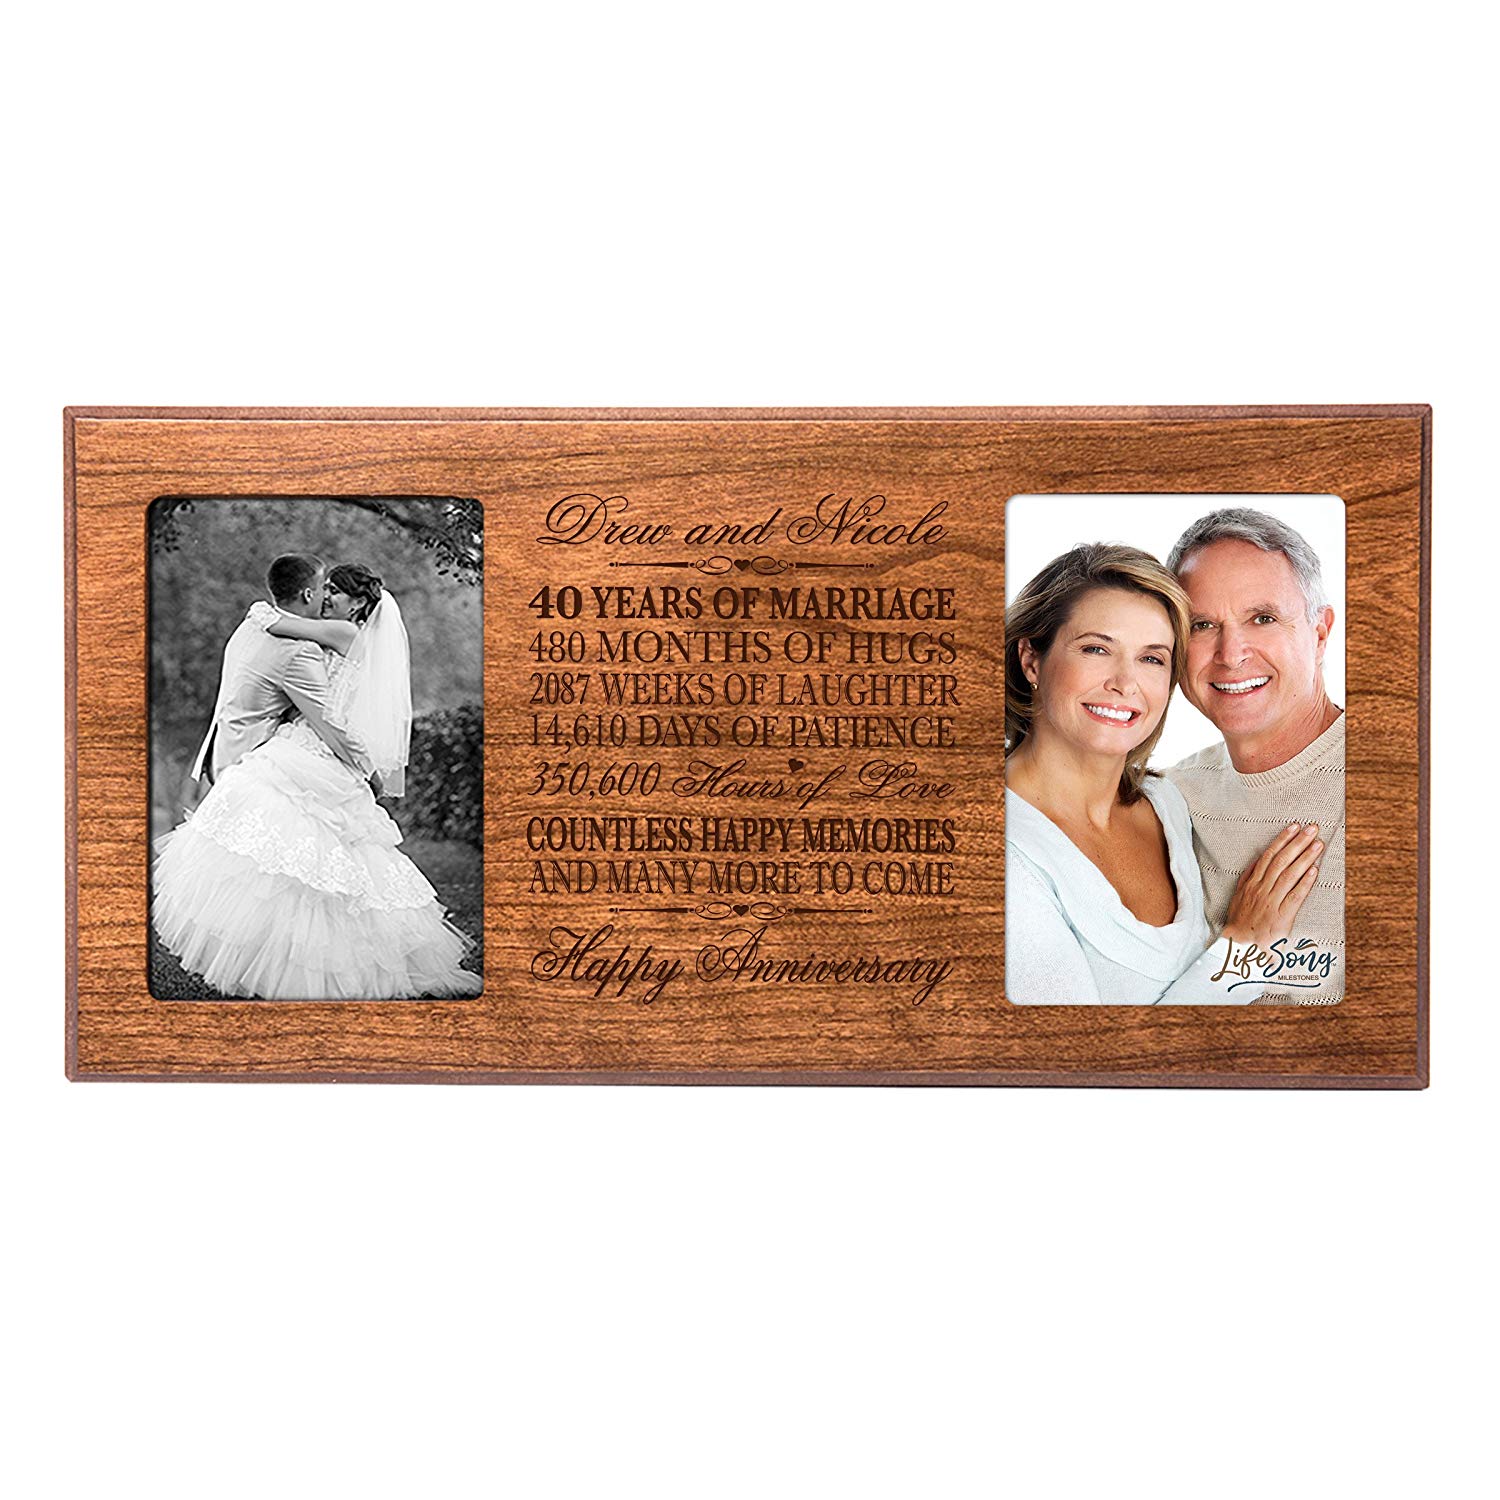 40th Anniversary - 4x6 Inch Wood Picture Frame - Great Anniversary